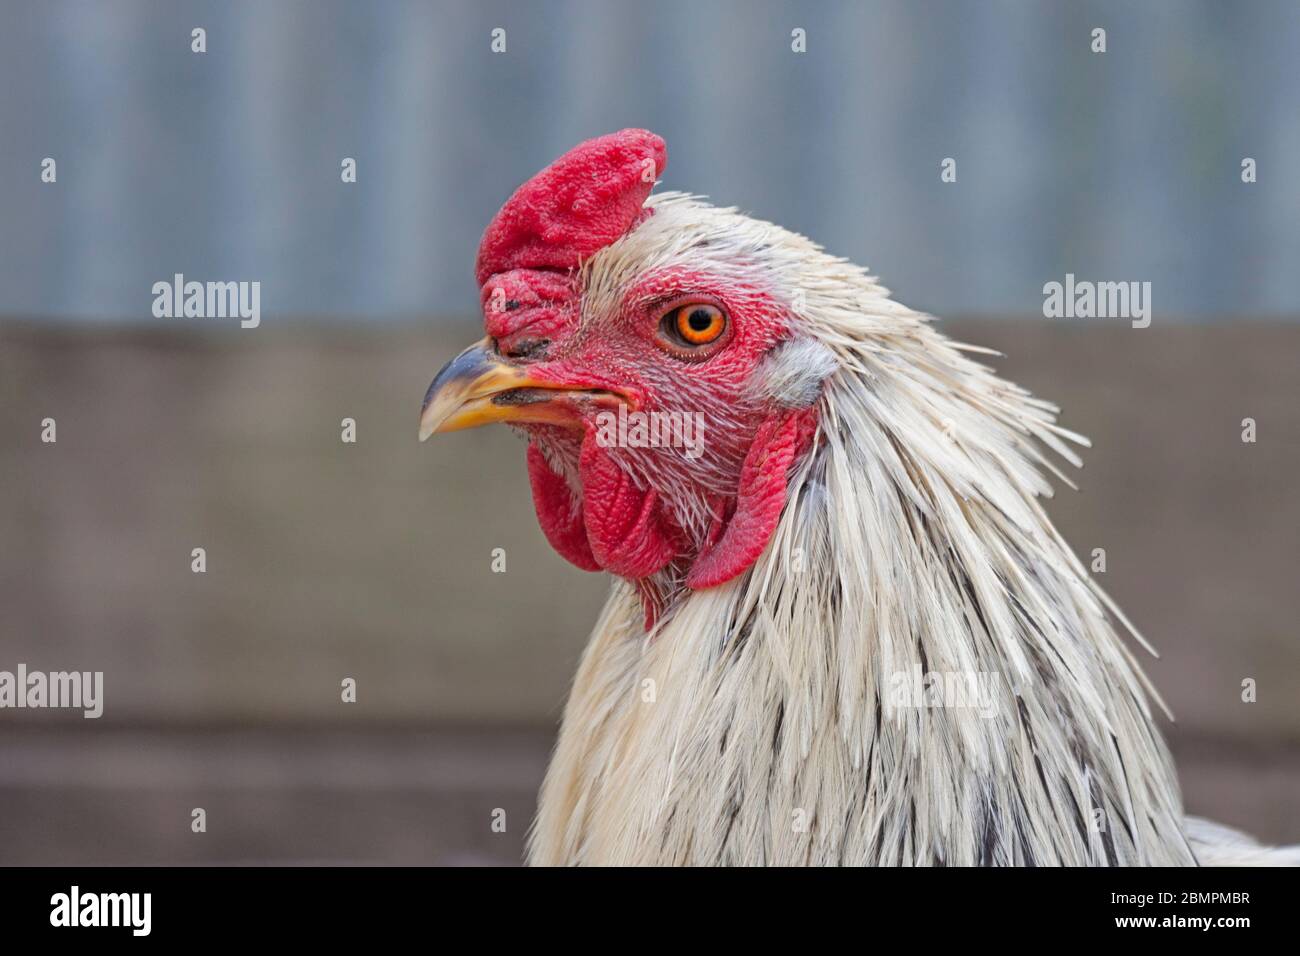 A portrait of a large white rooster with a glowing red comb. Stock Photo